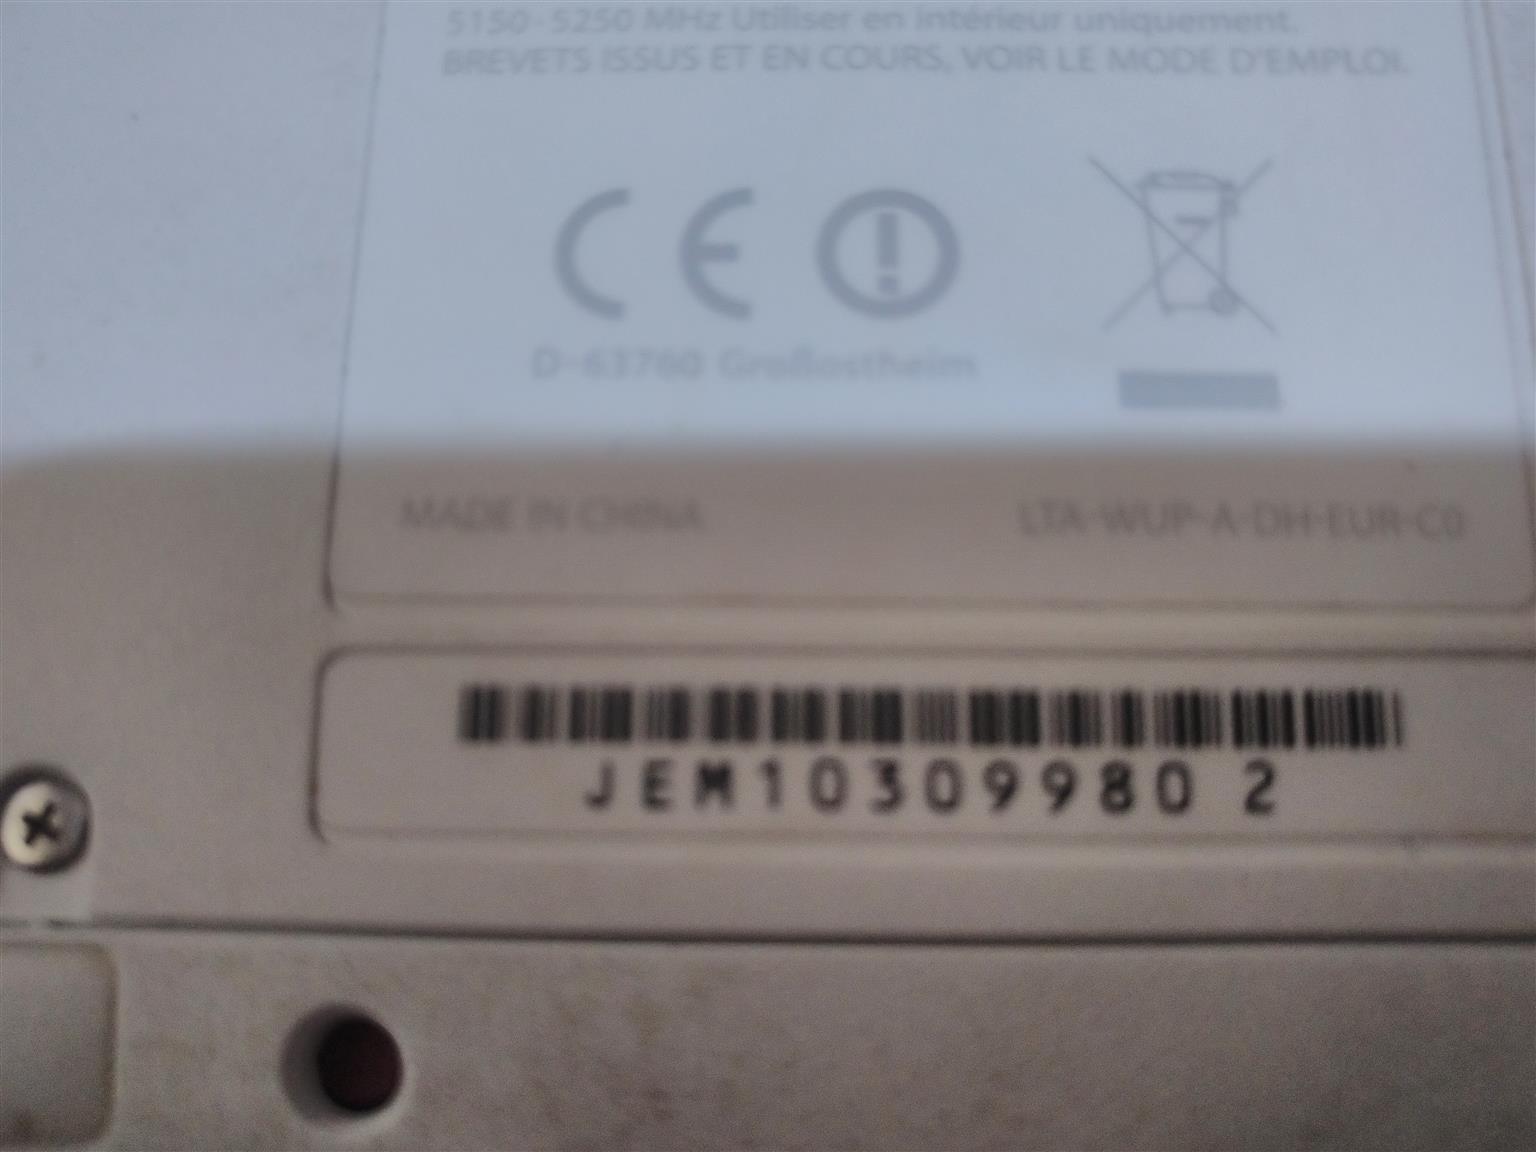 places to find the wii u serial number